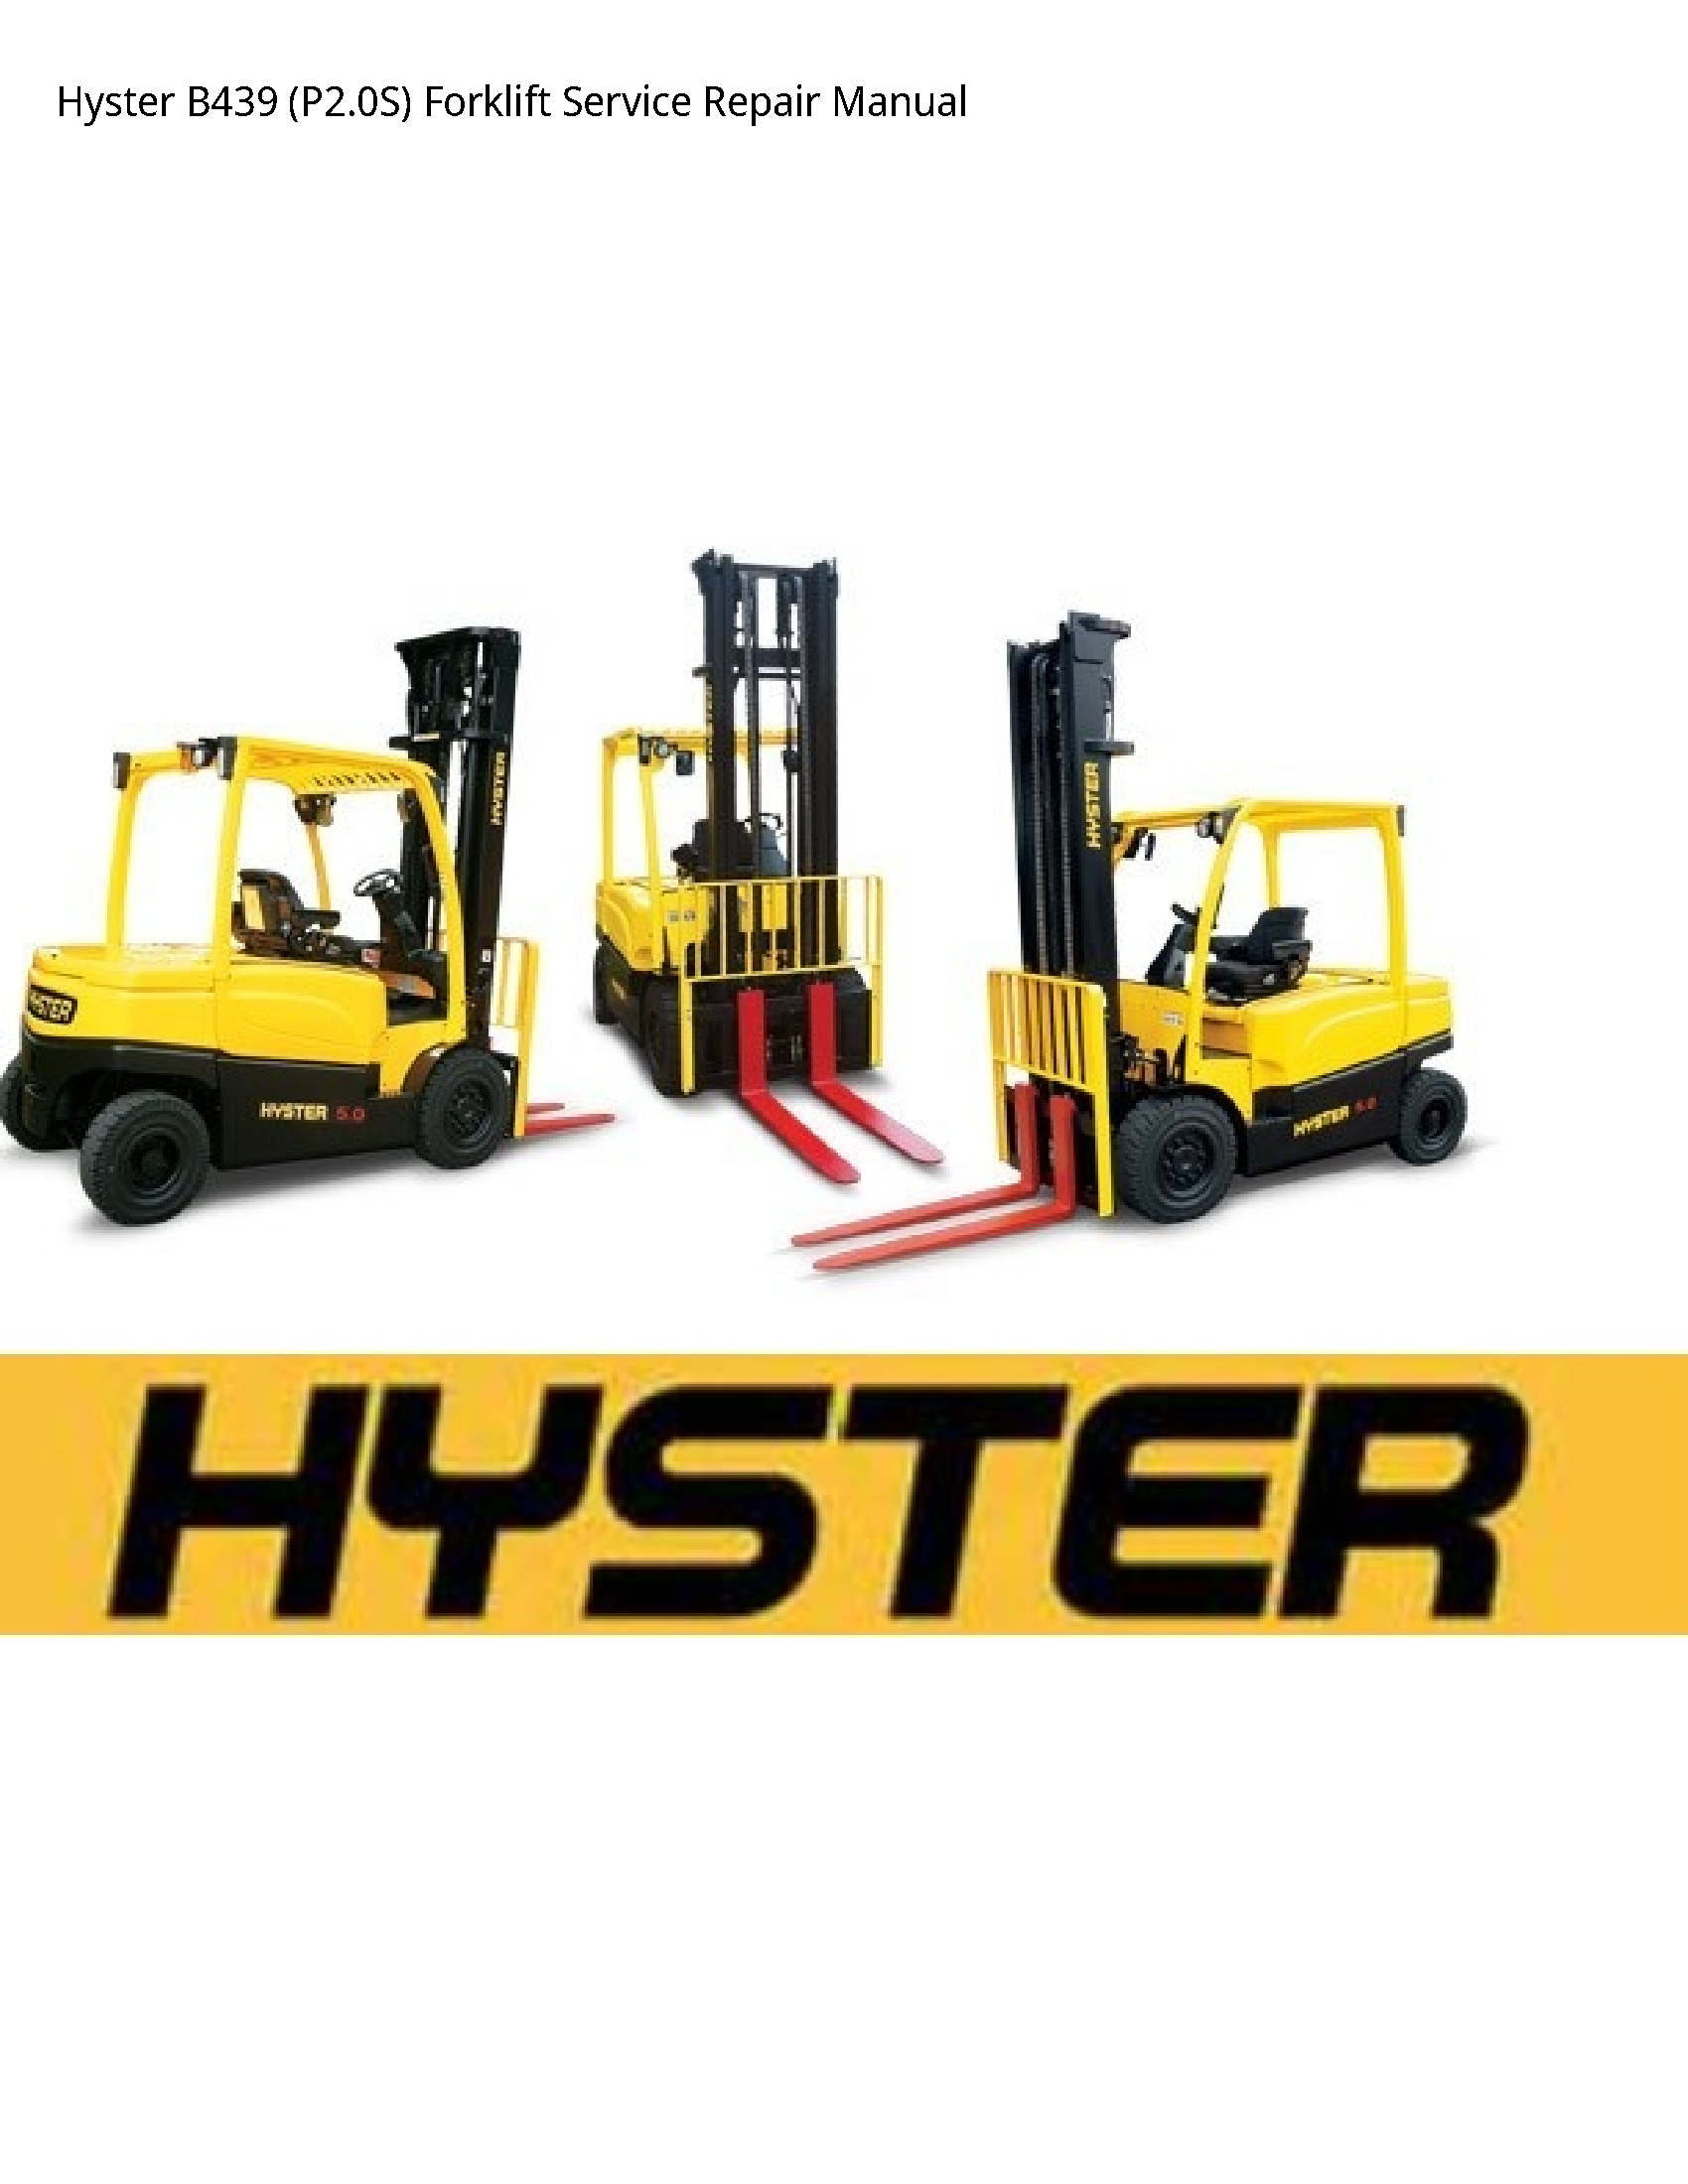 Hyster B439 Forklift manual